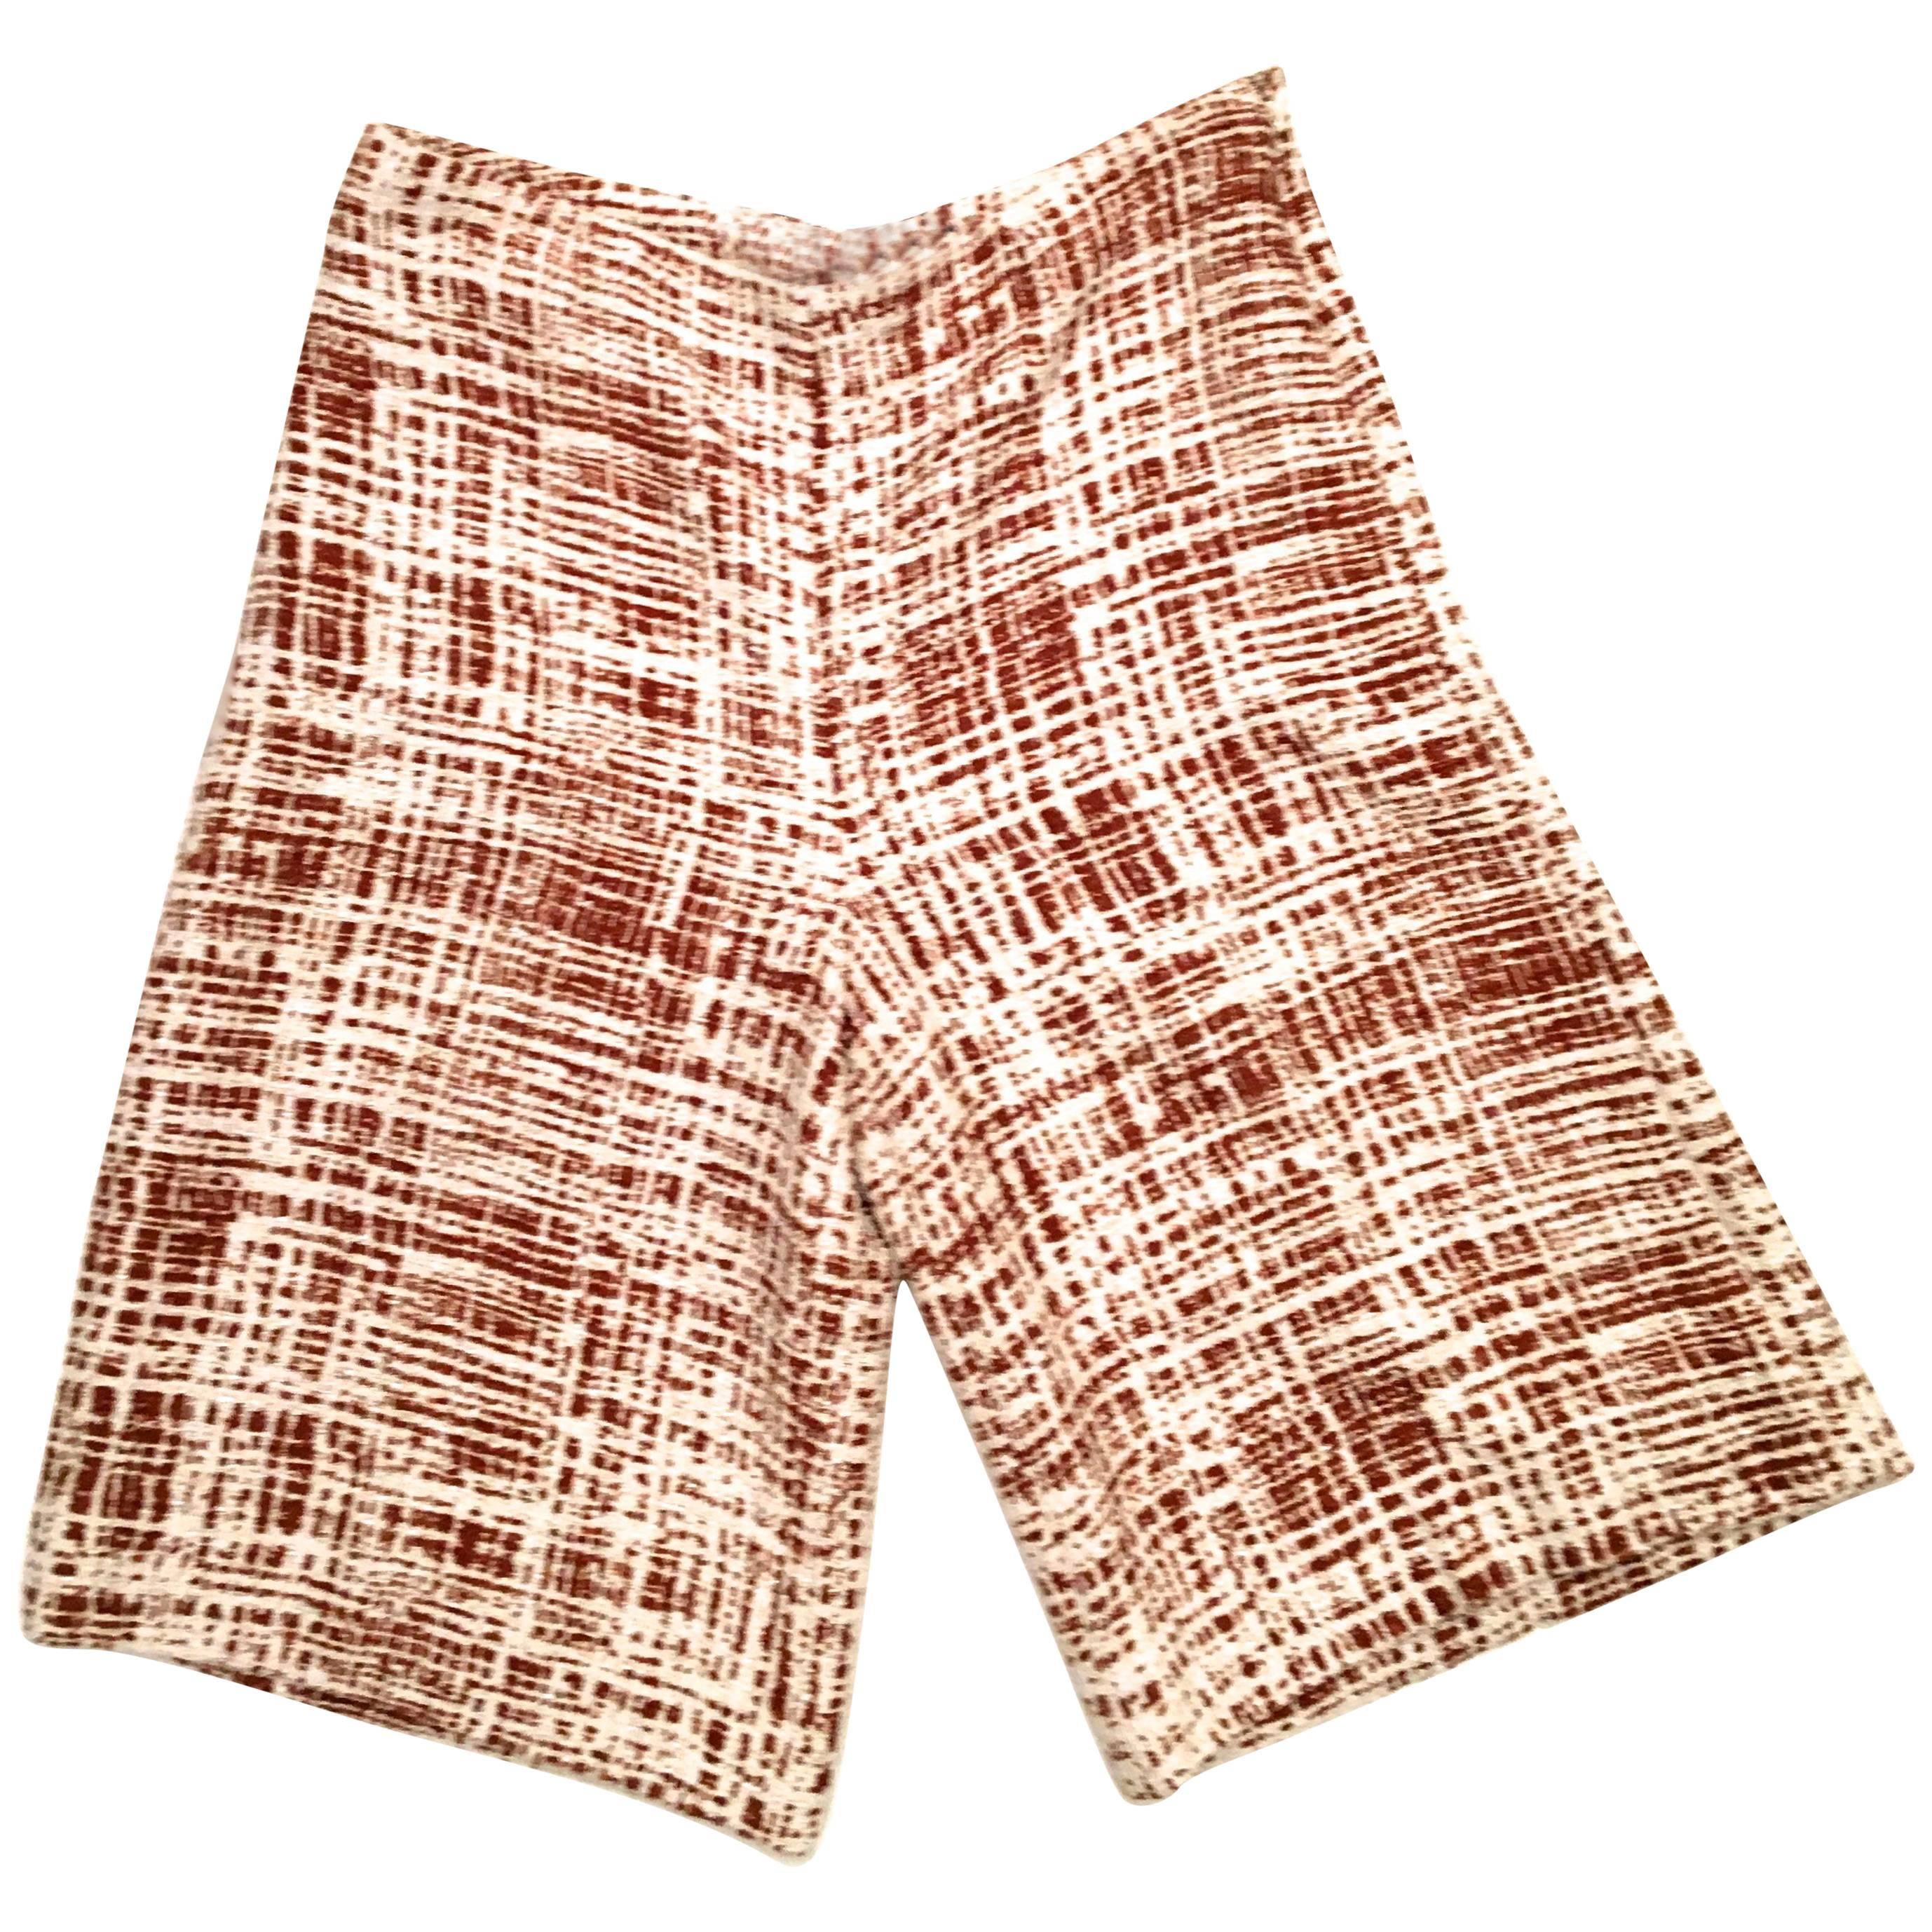  Prada Tweed Shorts - New  with tags Retail $915 For Sale